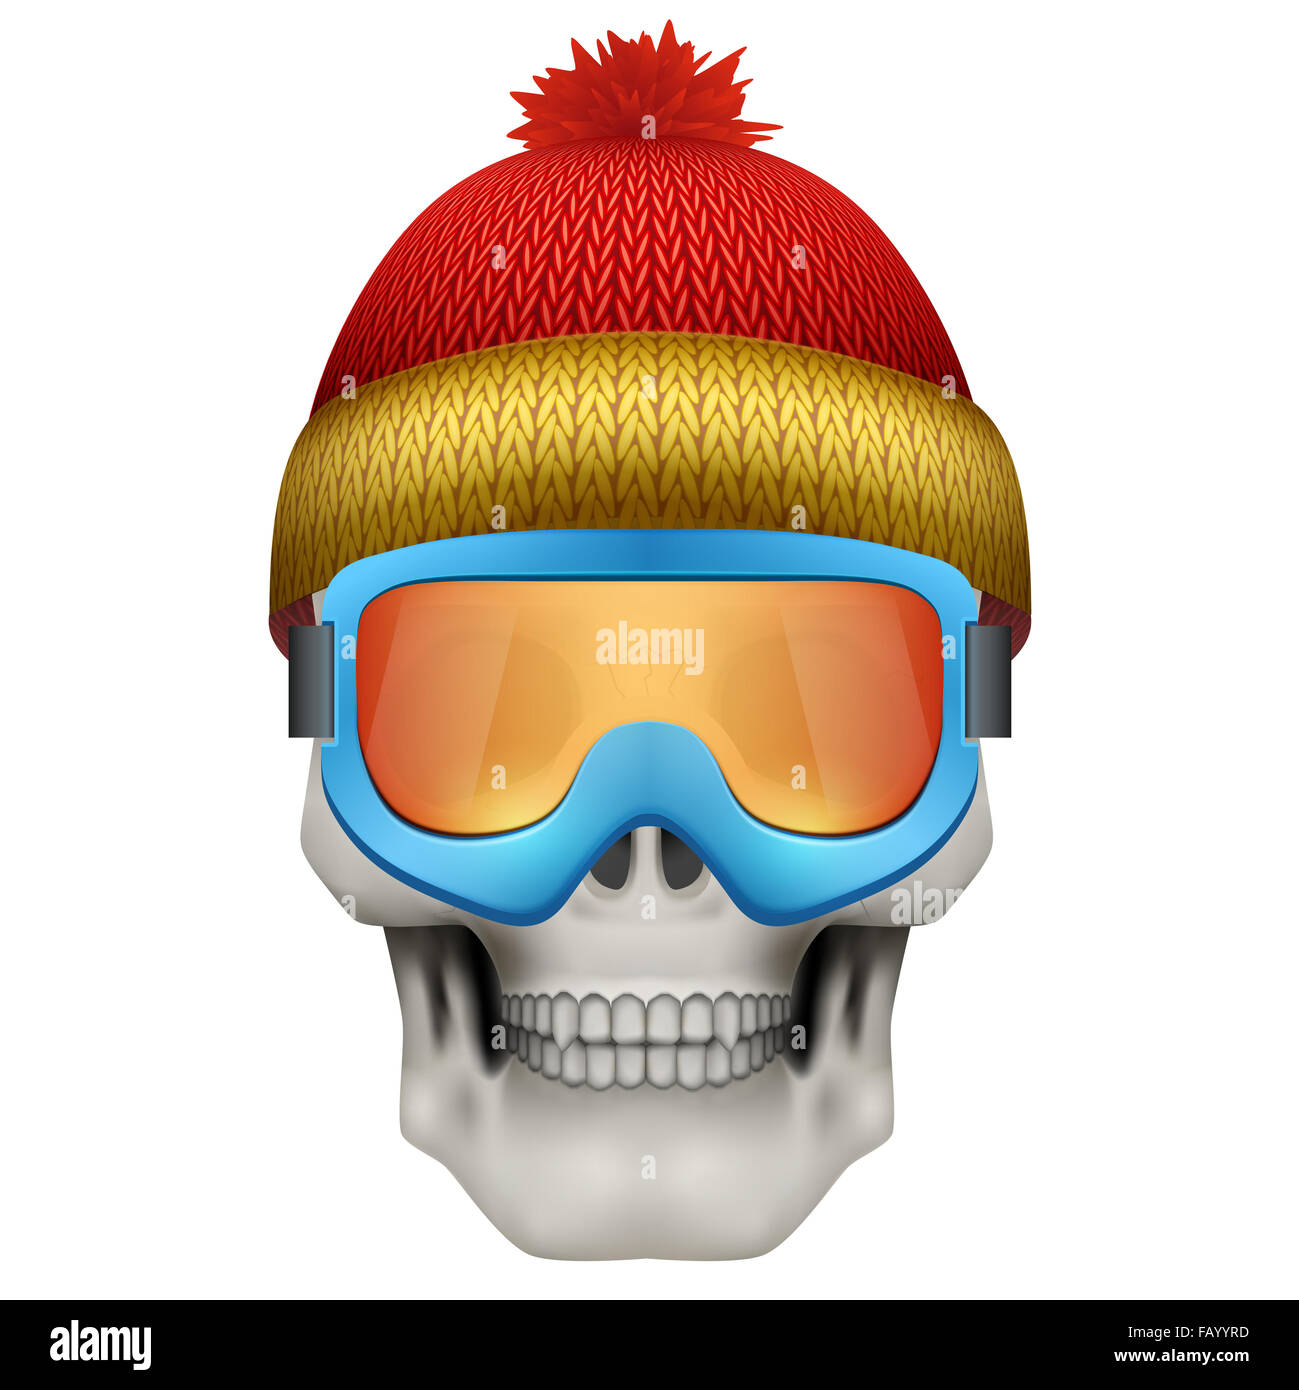 Human skull with winter hat and goggles. Stock Photo